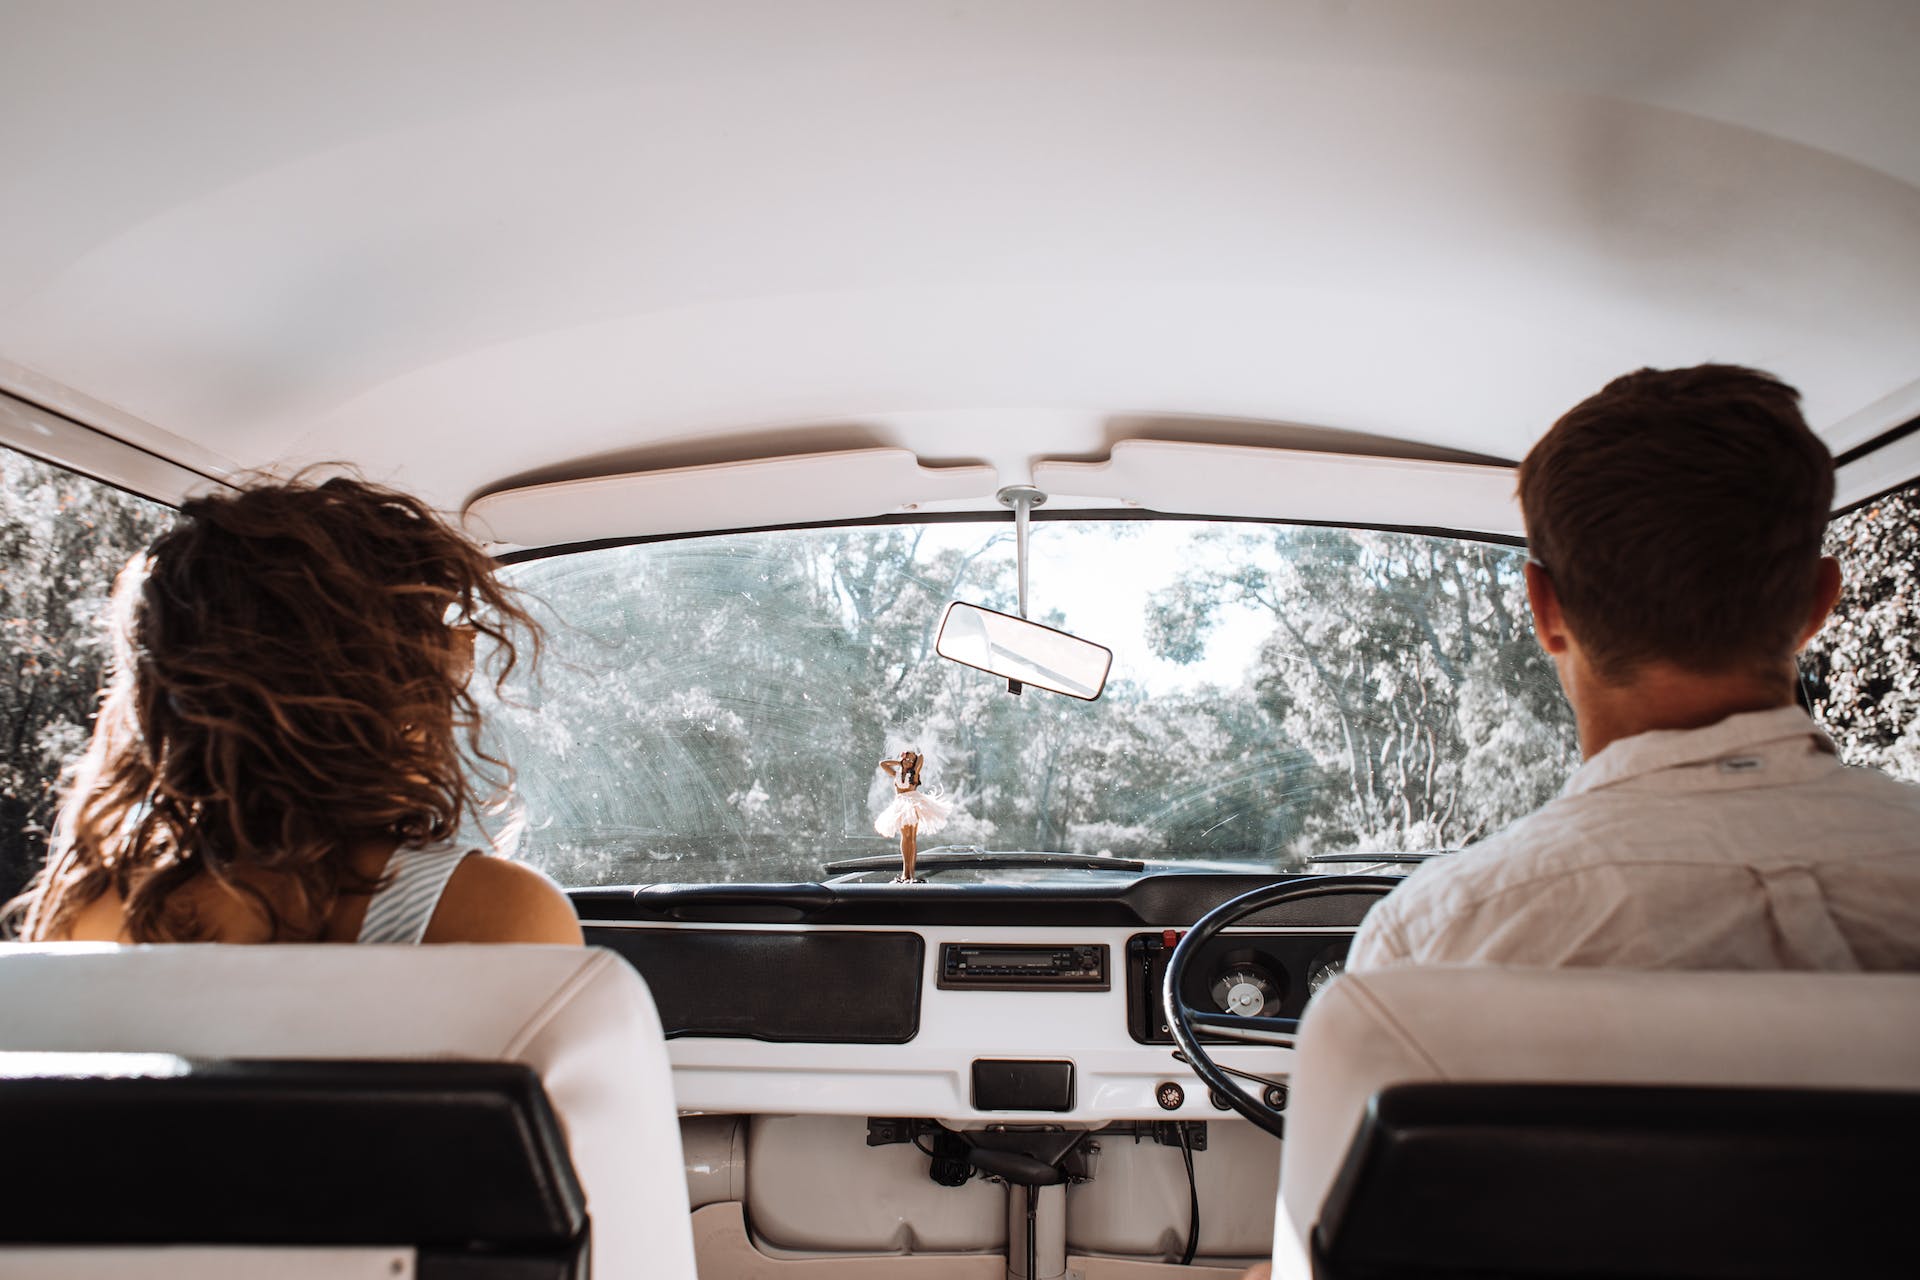 Couple in car | Source: Pexels